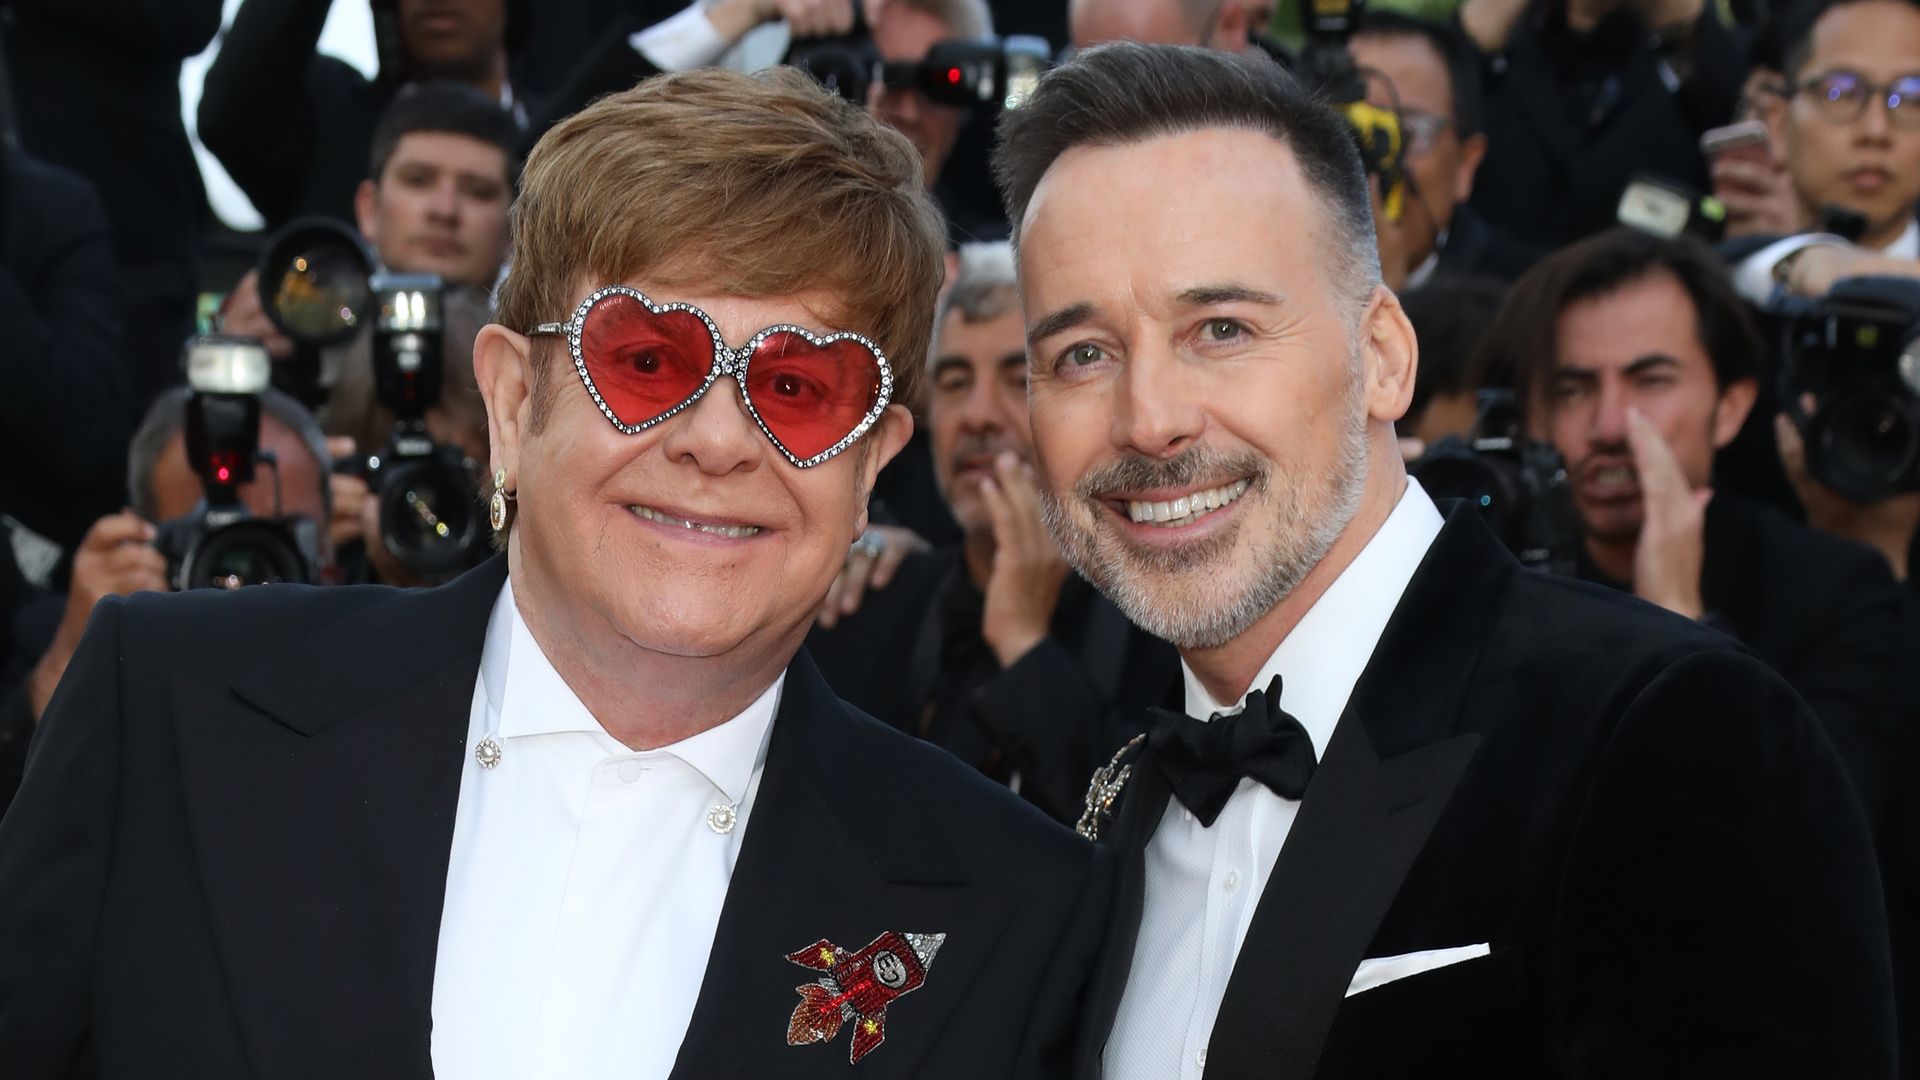 Elton John and David Furnish attend the screening of "Rocket Man" during the 72nd annual Cannes Film Festival on May 16, 2019